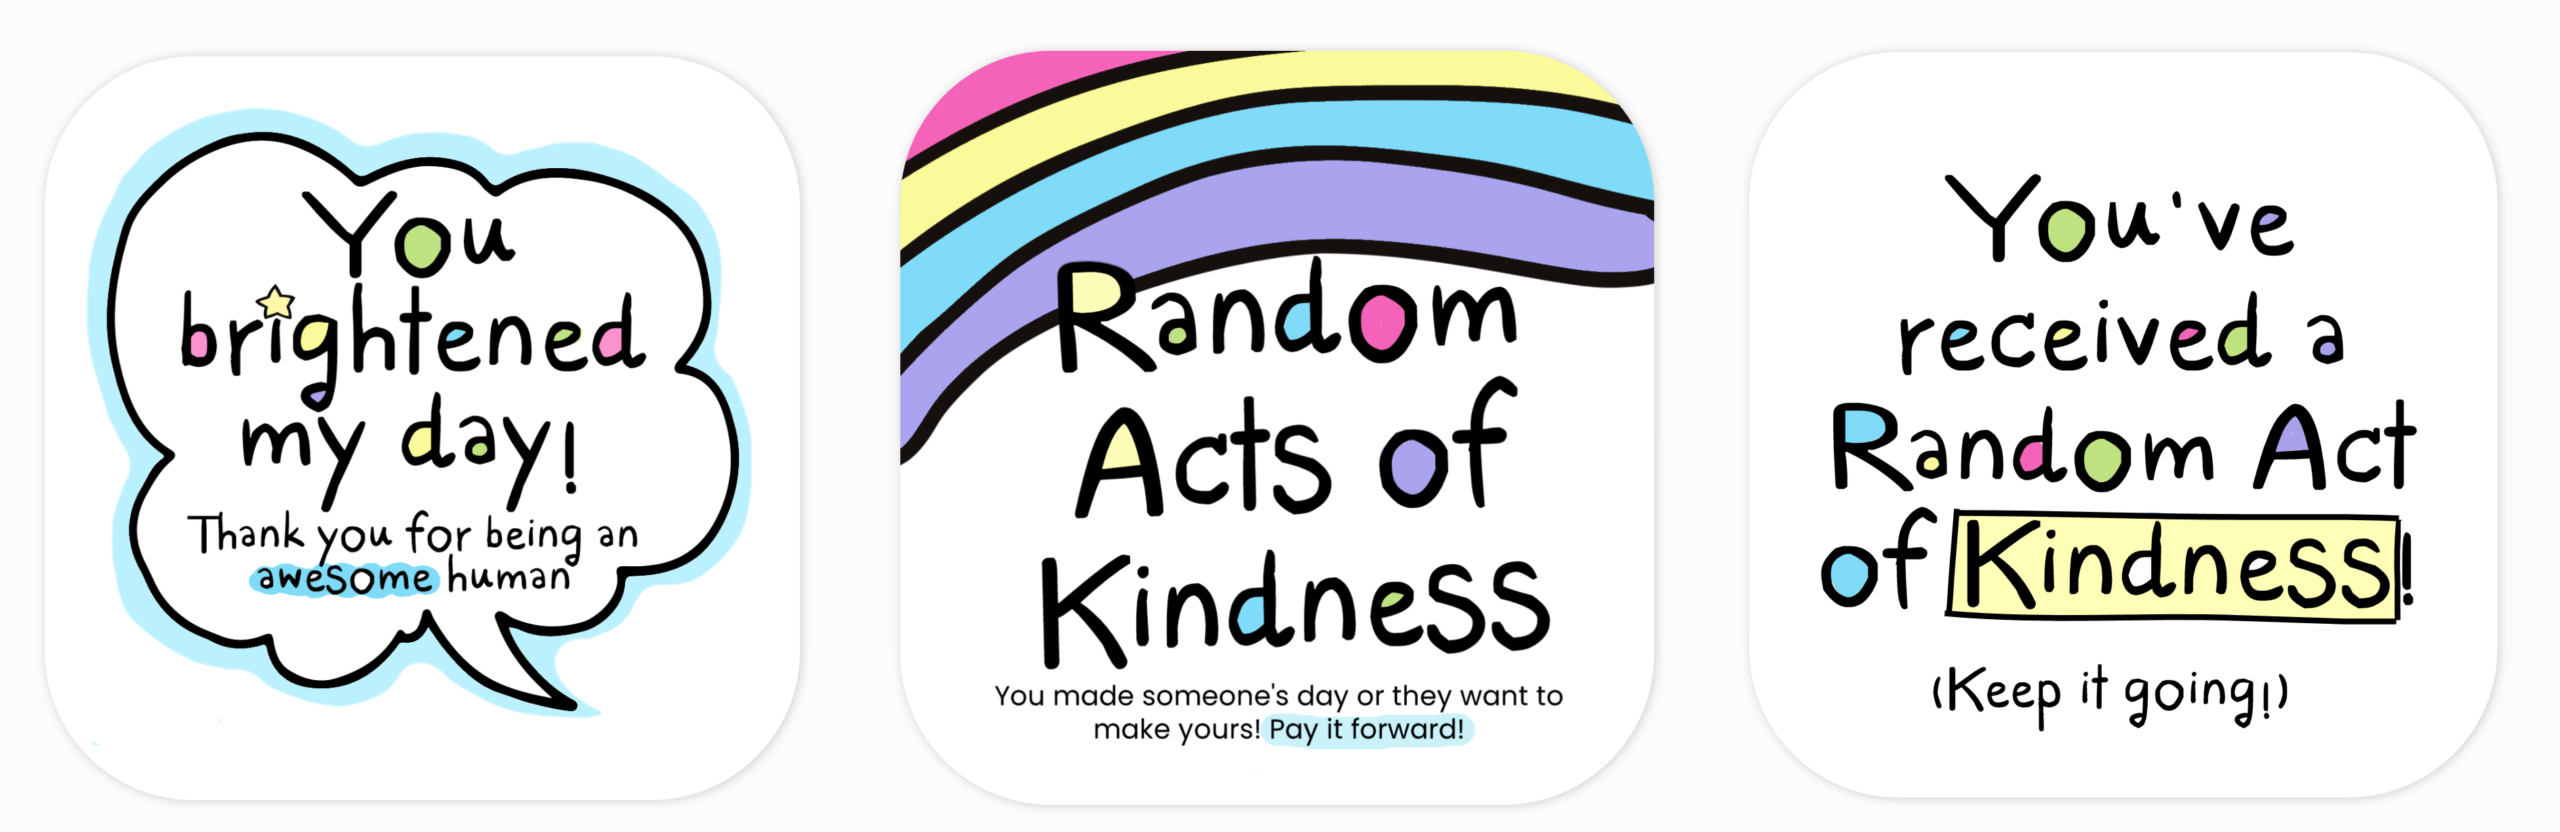 Random Acts Of Kindness Cards - Blessing Manifesting With Regard To Random Acts Of Kindness Cards Templates